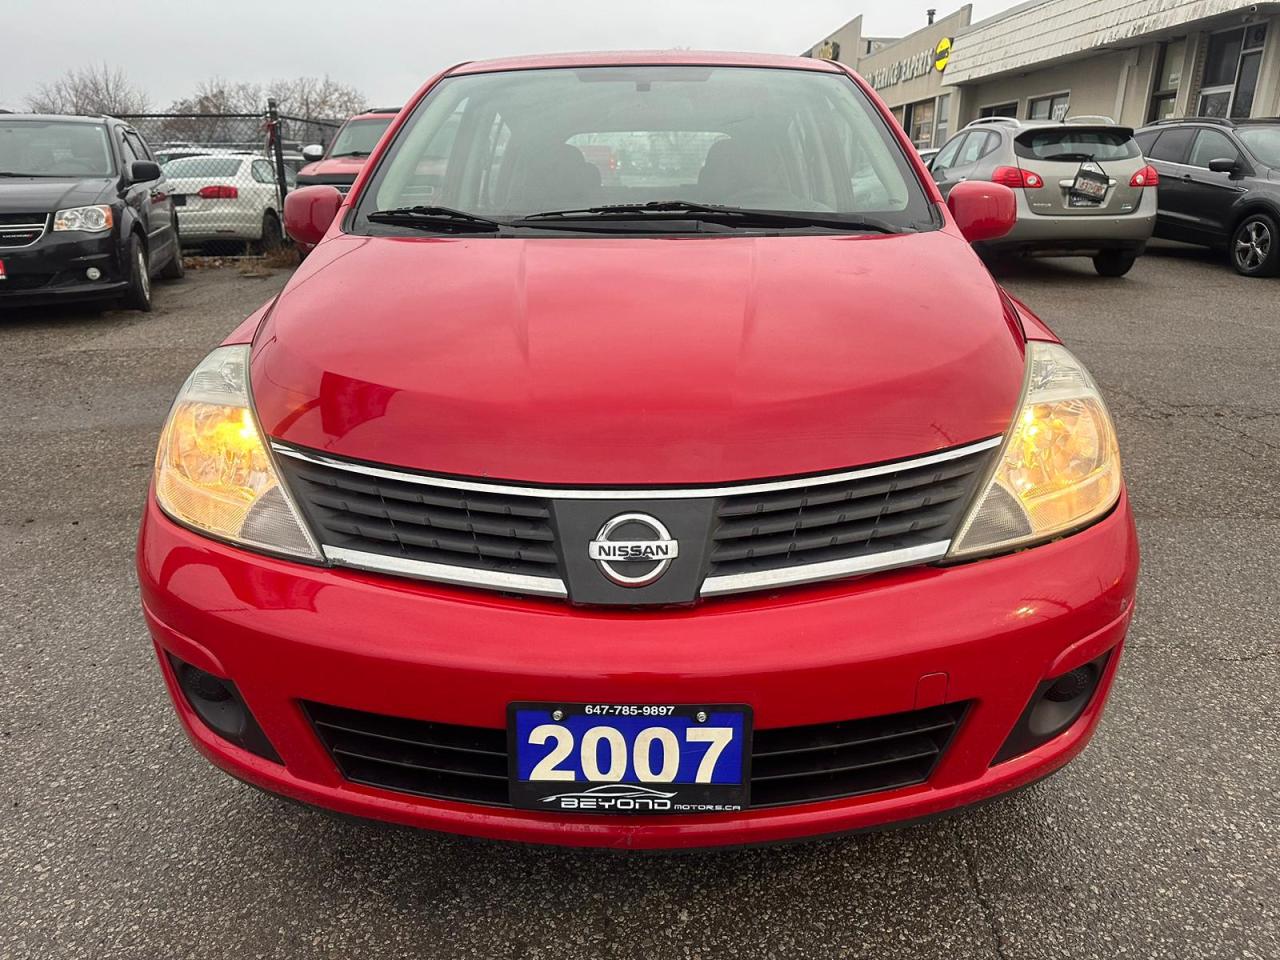 2007 Nissan Versa S CERTIFIED WITH 3 YEARS WARRANTY INCLUDED - Photo #1